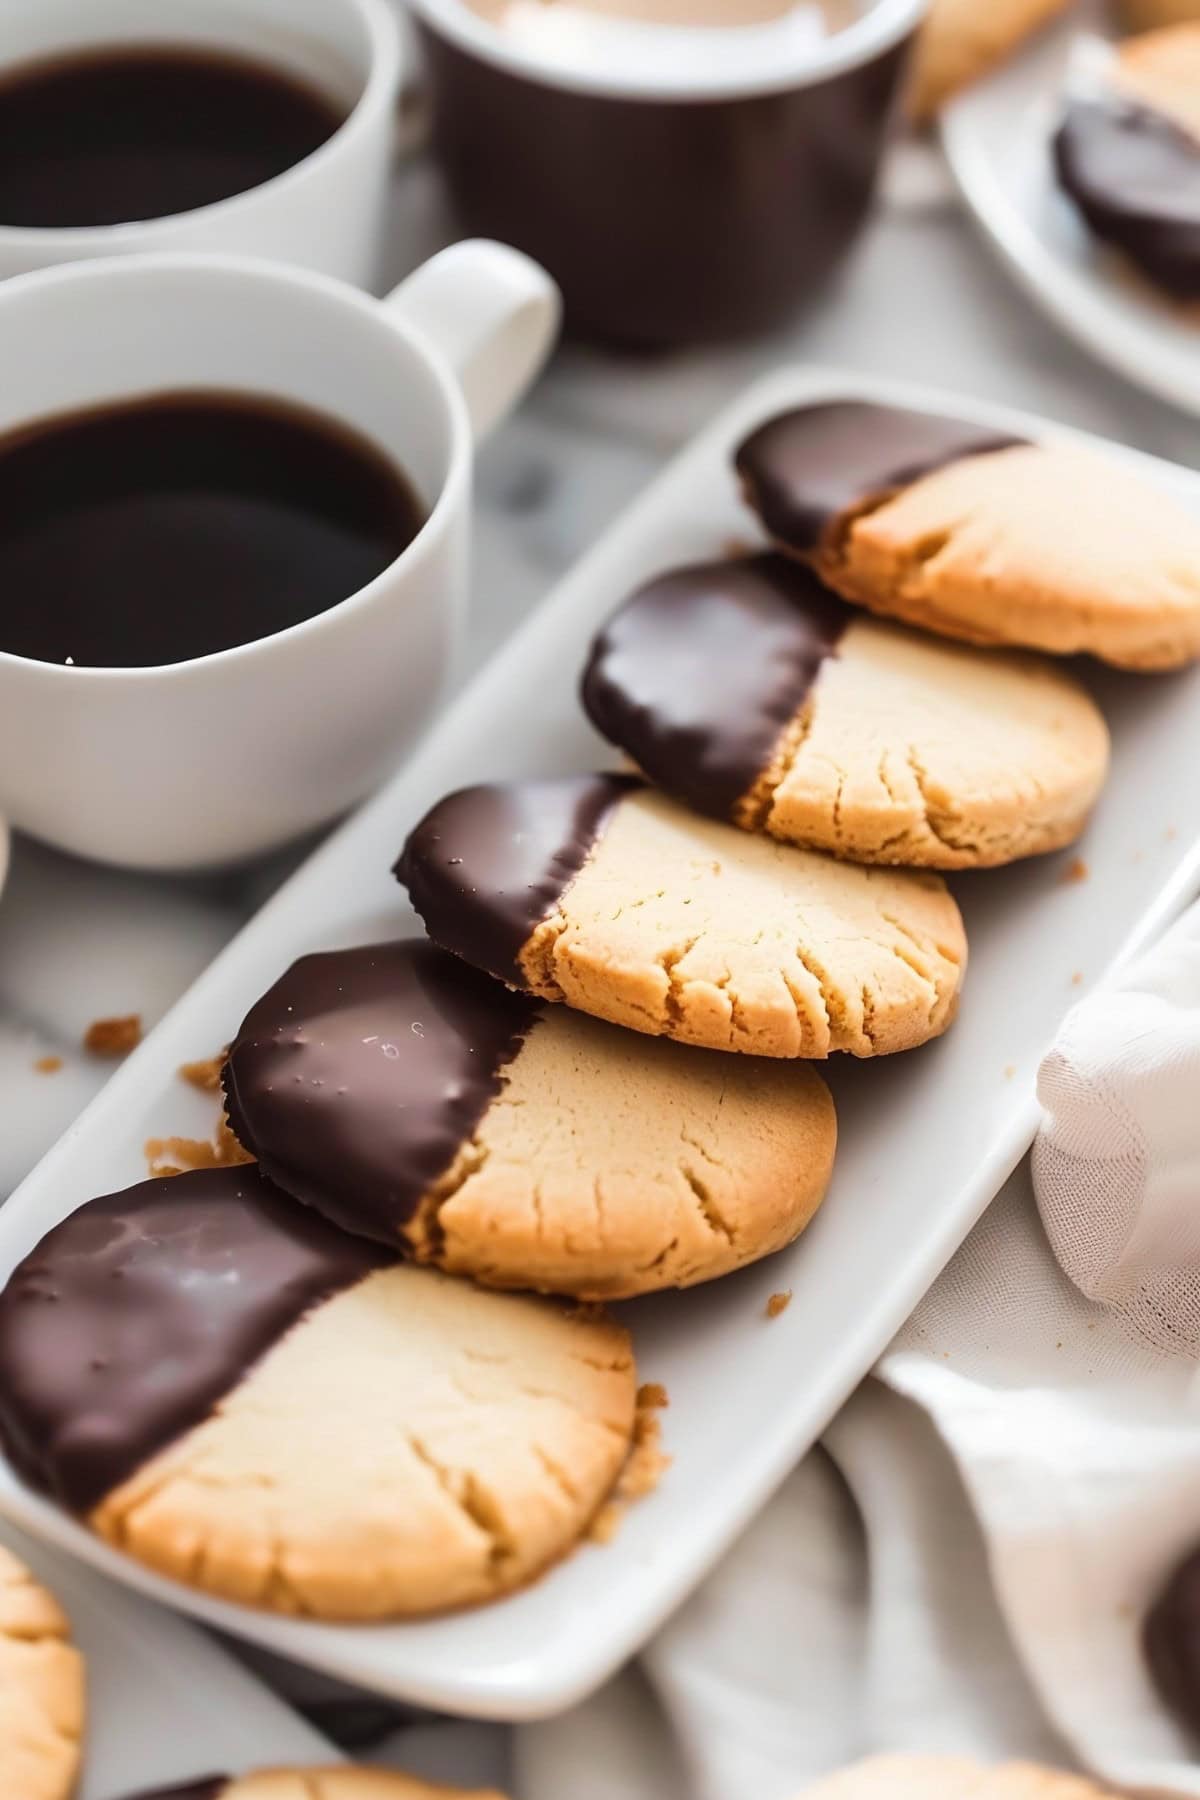 Chocolate-Dipped Shortbread Cookies Lined Up on a Thin Serving Plate with Cups of Coffee in the Background